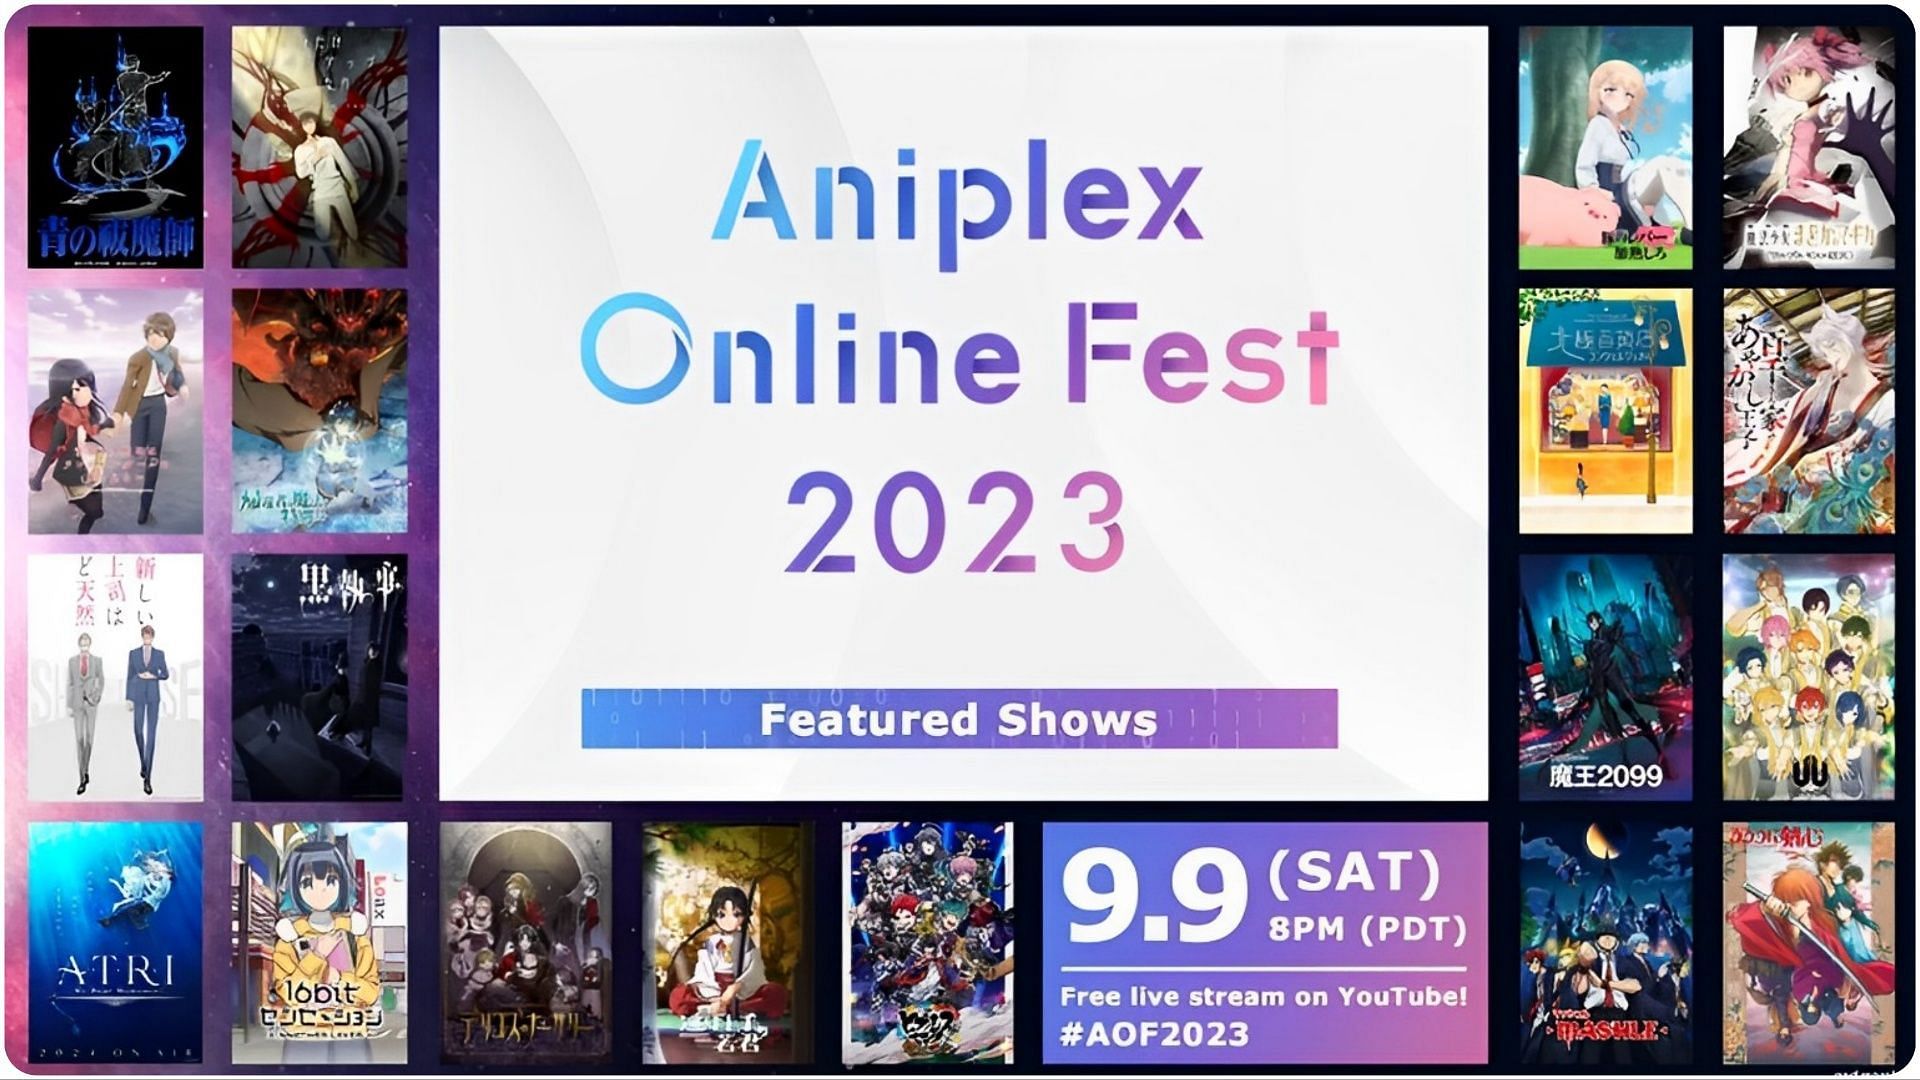 Aniplex Online Fest 2022: Every Anime Announcement From the Event